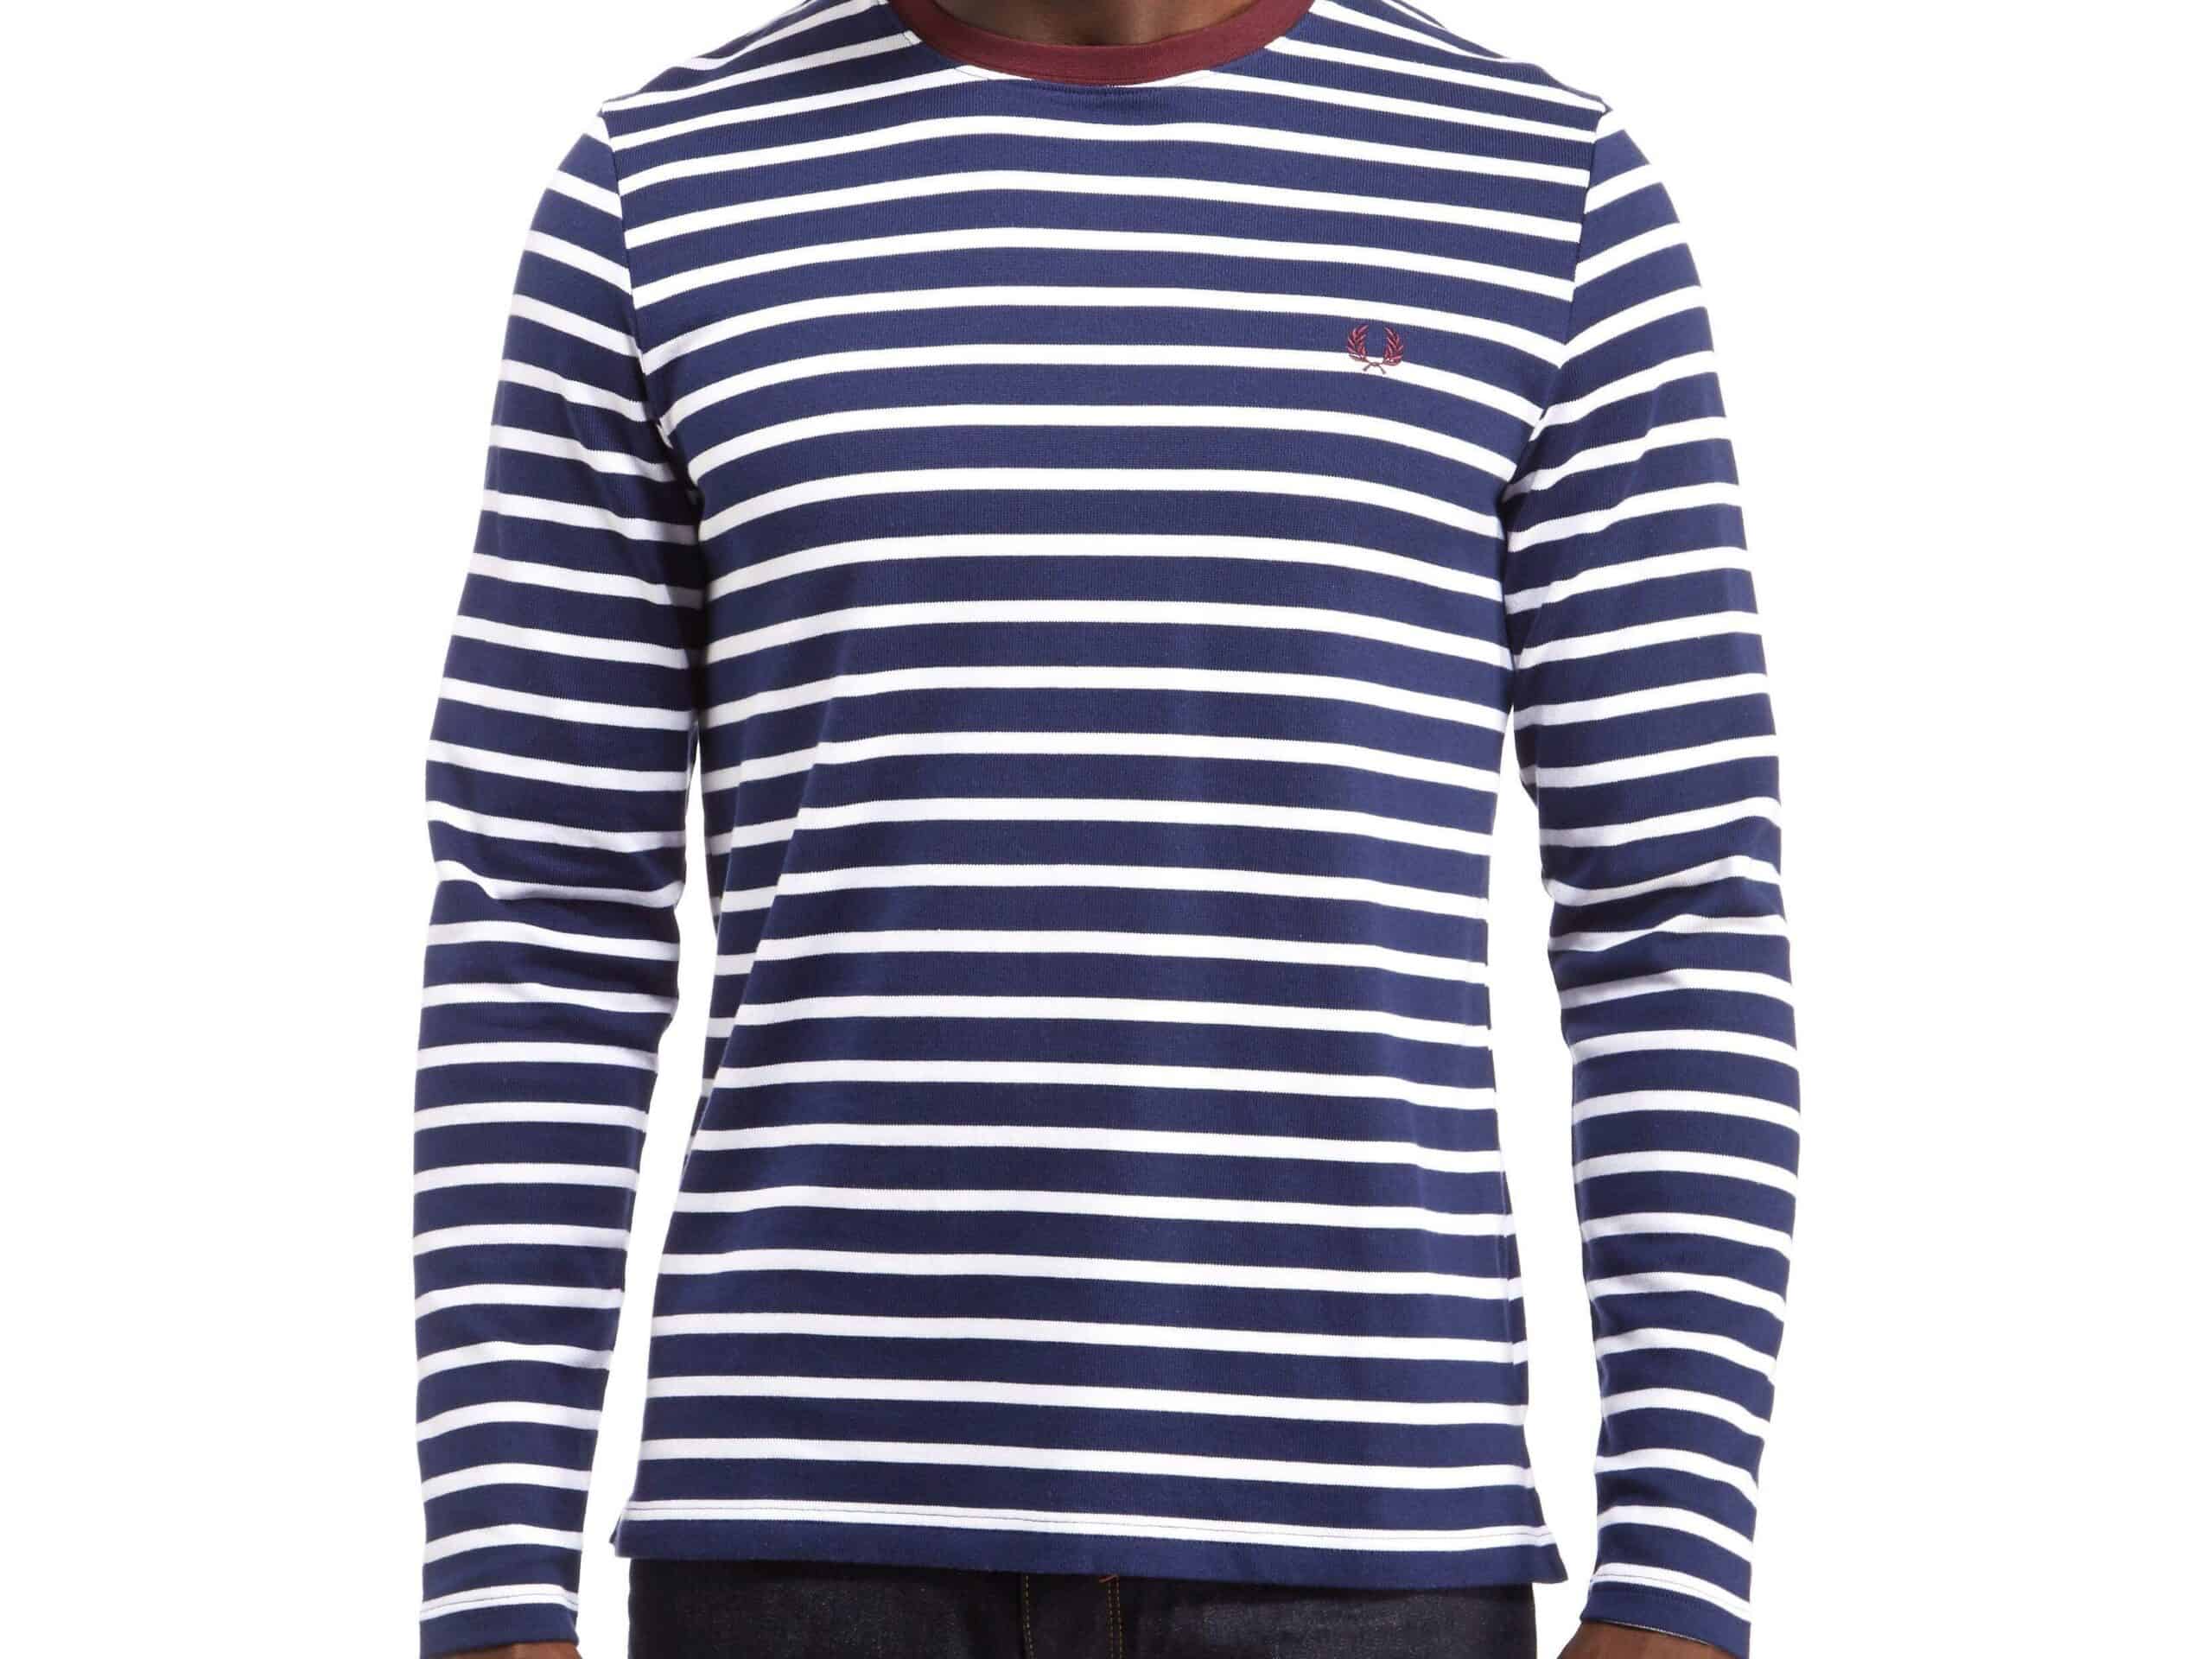 A long-sleeved shirt inspired by the original Breton style would be an easy way to incorporate stripes into your wardrobe.